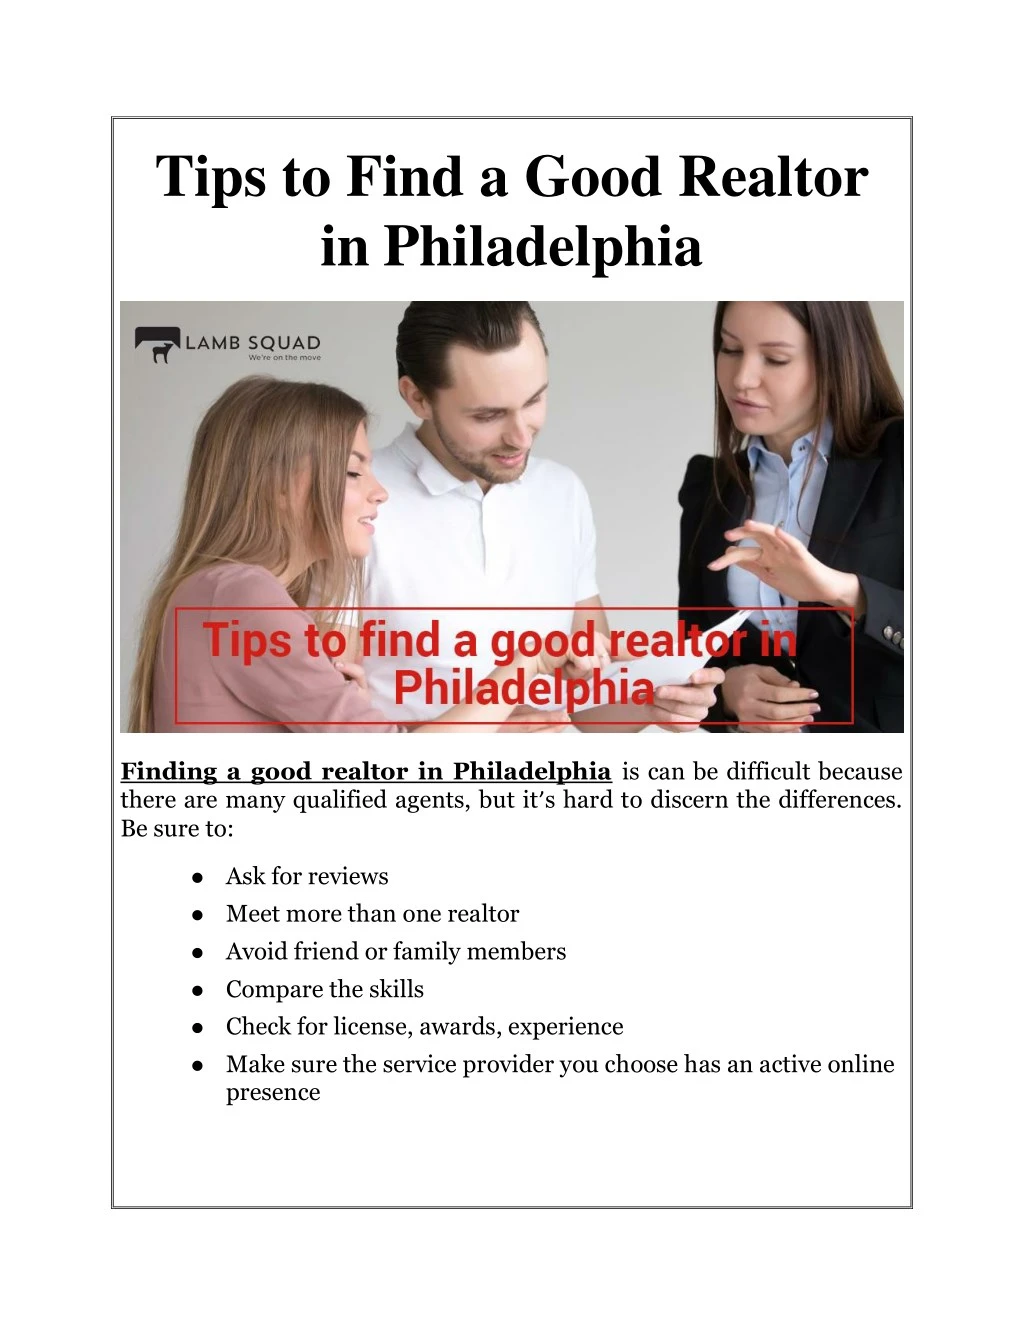 tips to find a good realtor in philadelphia